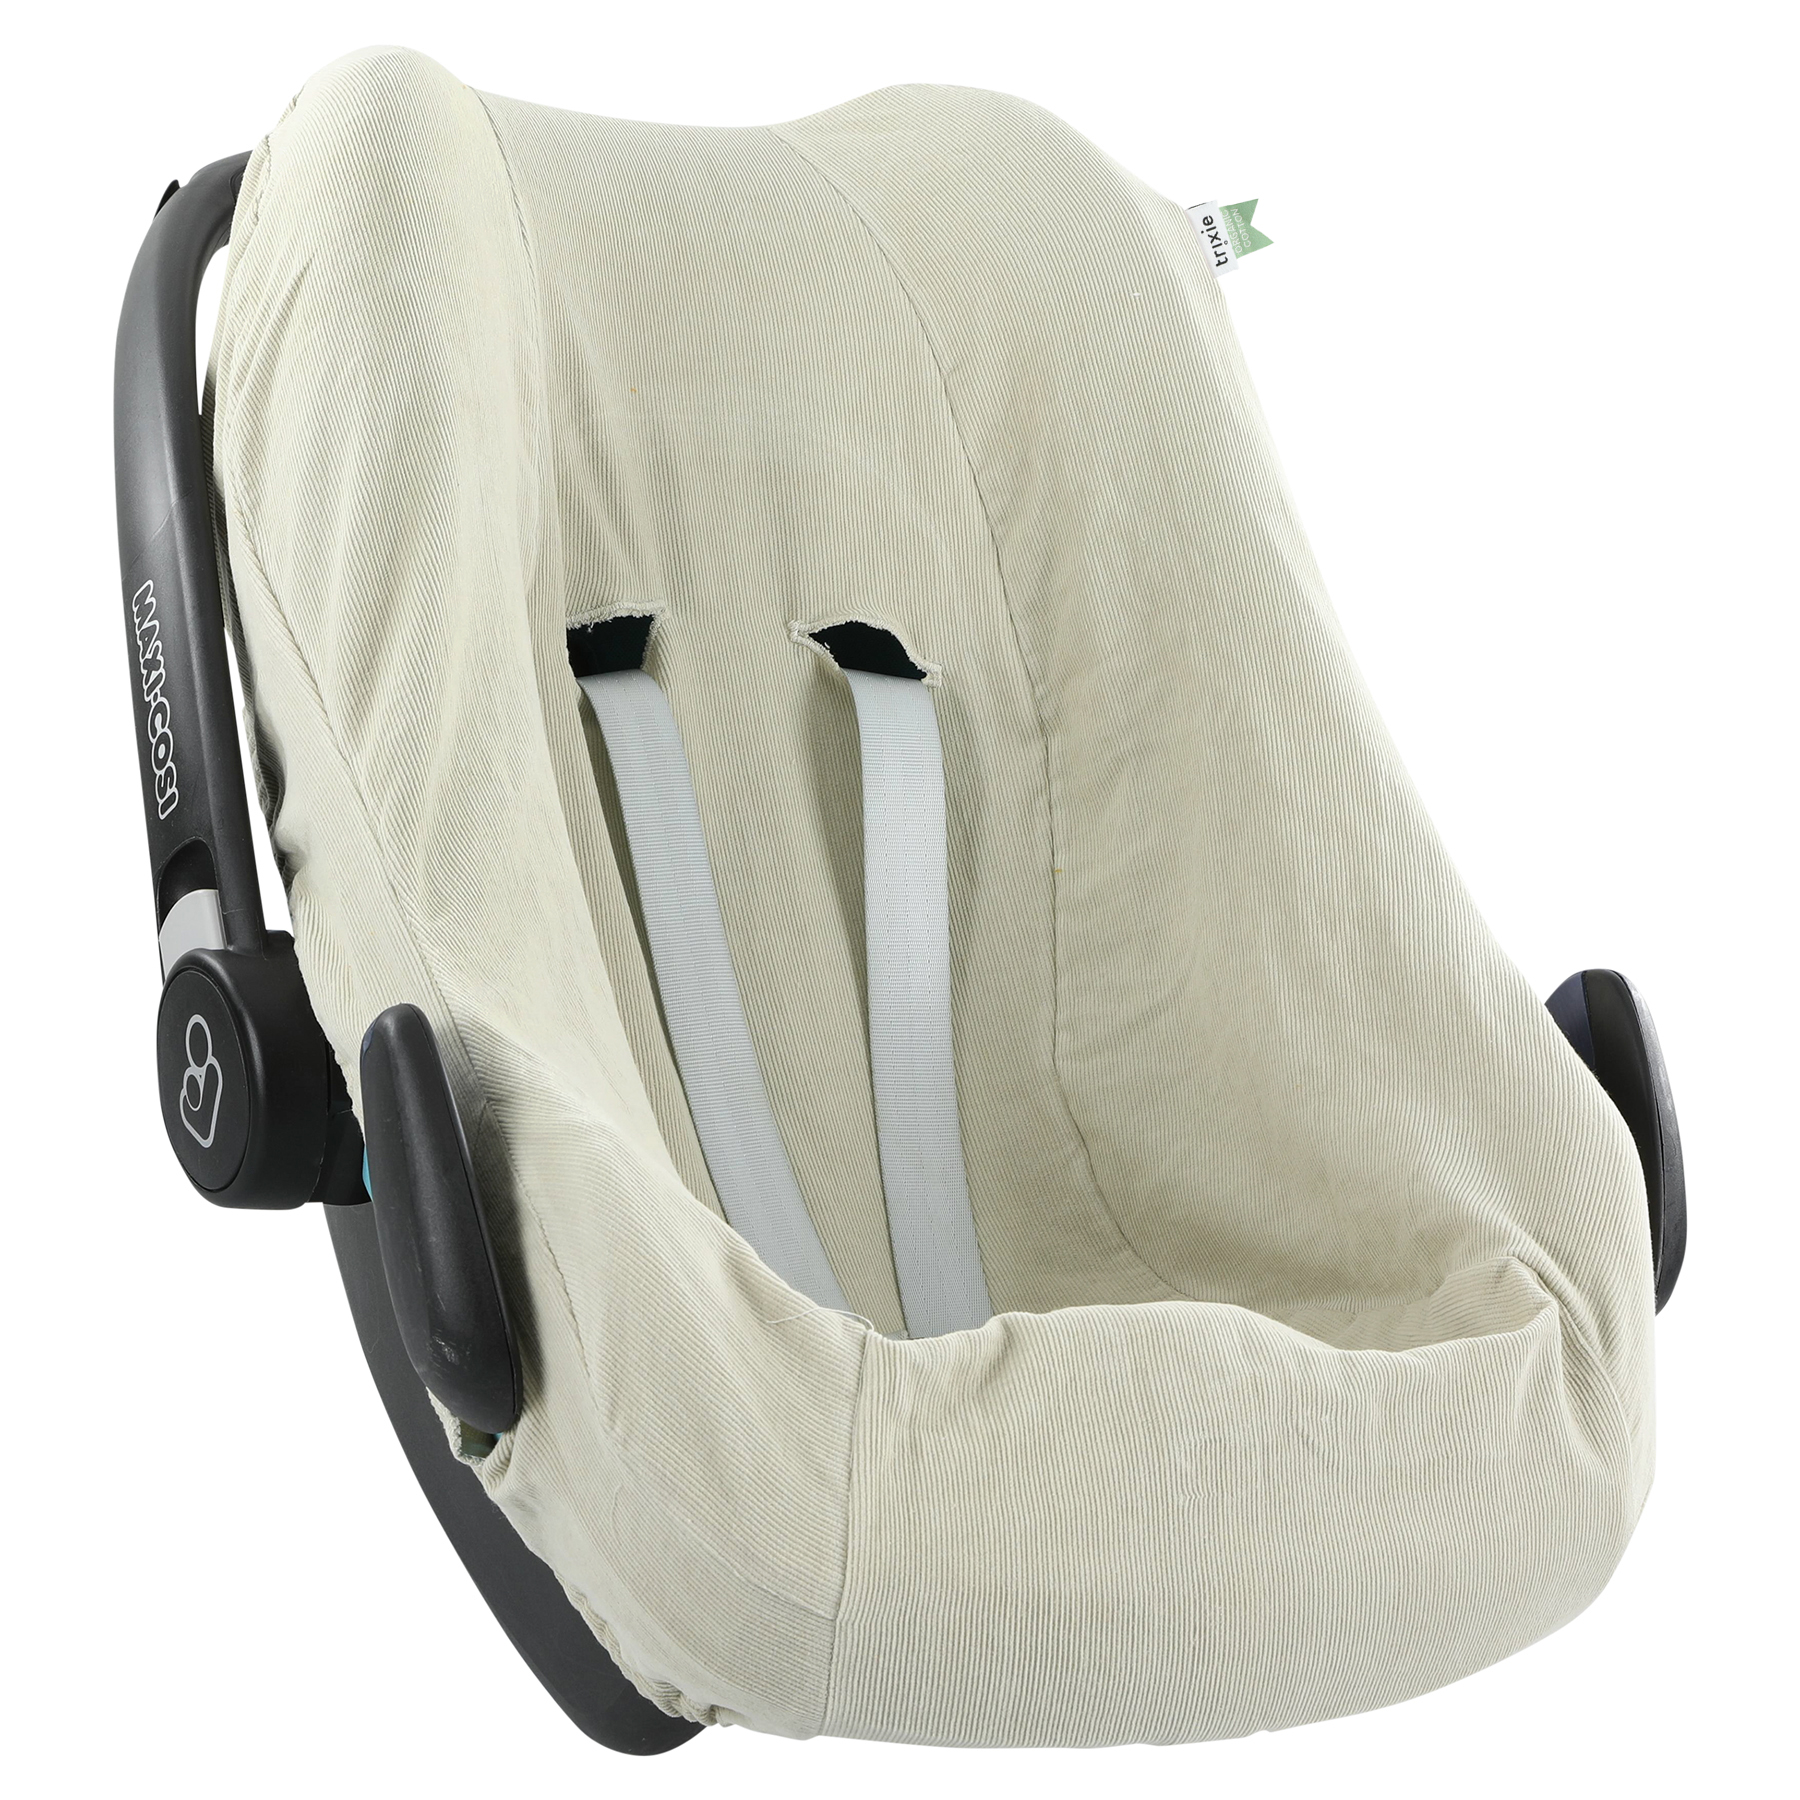 Afstoten specificeren Opgetild Car seat cover | Pebble(Plus)/Rock/Pro I - Ribble Sand | Trixie